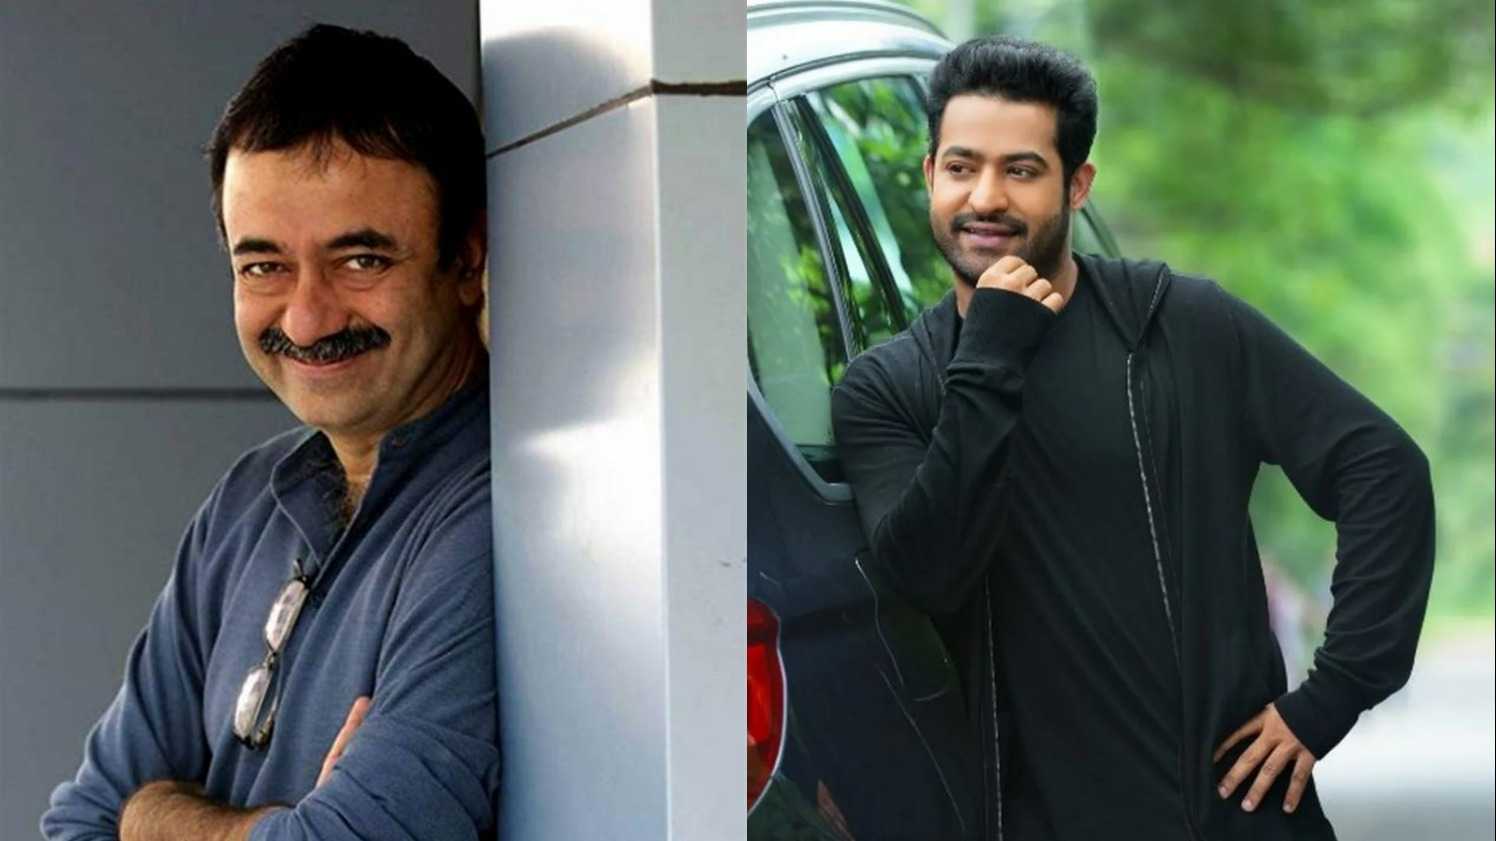 RRR star Jr. NTR wants to work with Rajkumar Hirani in a Bollywood film: 'He made films that put us in front of a mirror'